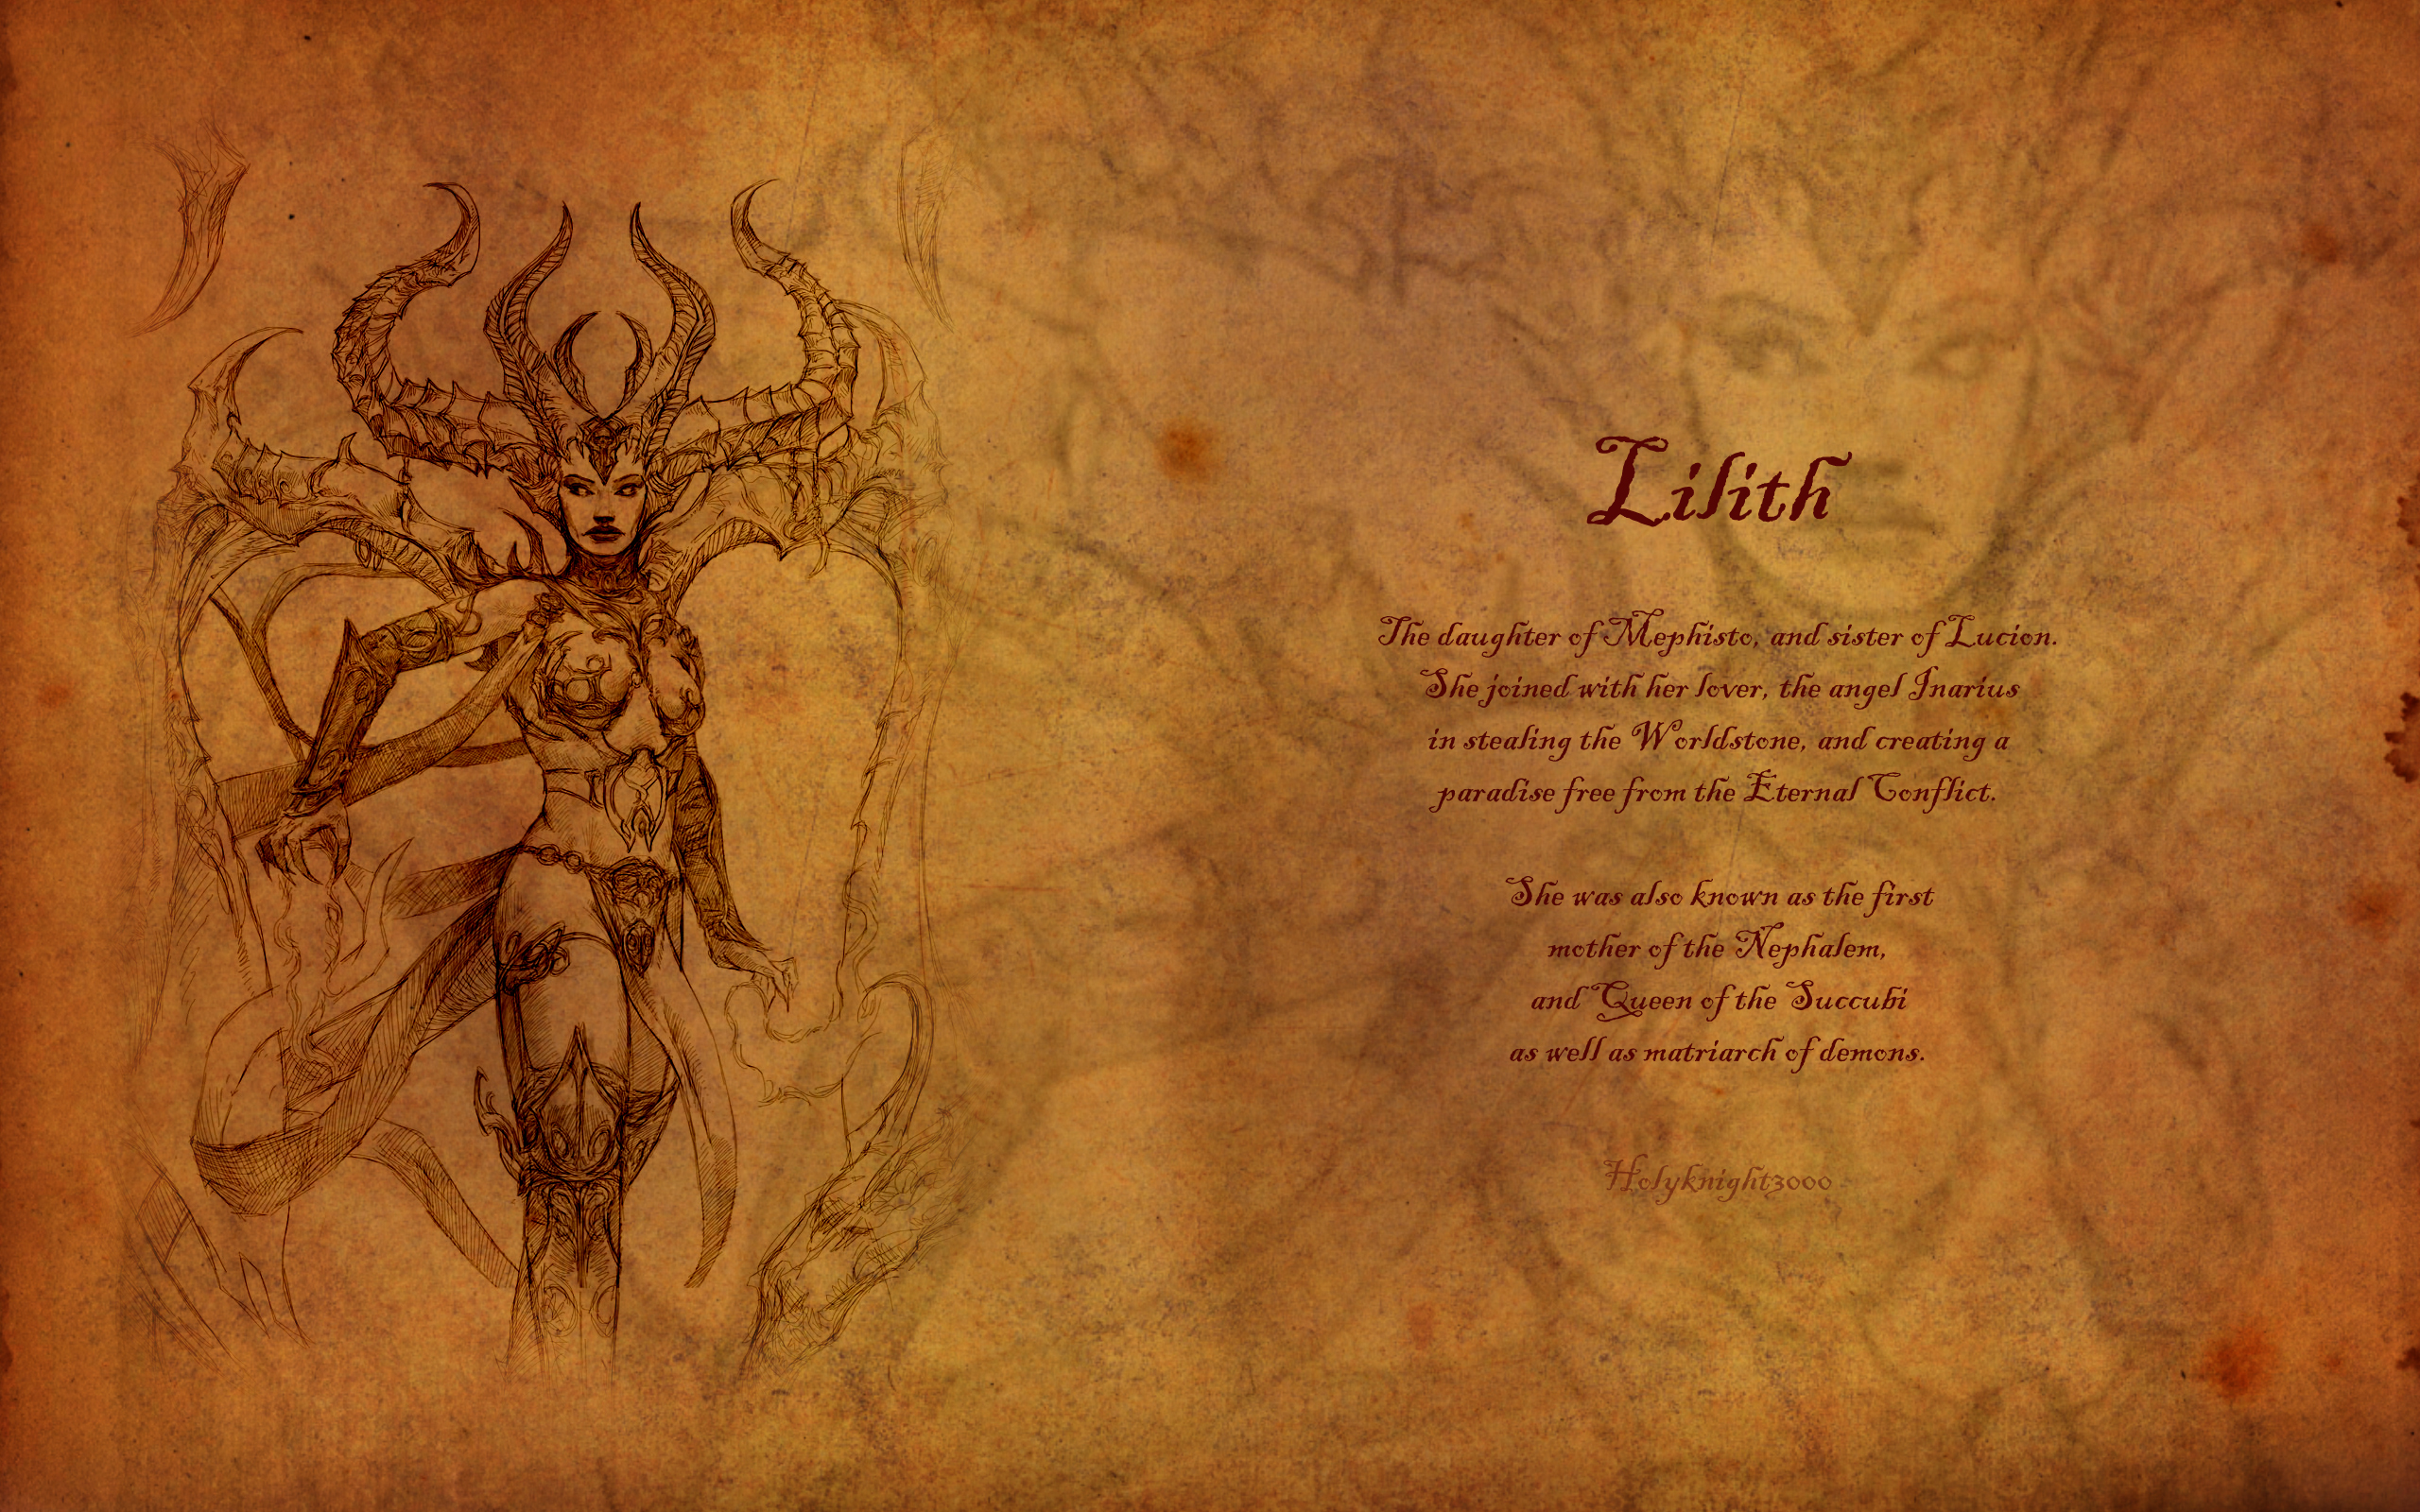 Lilith, First Mother of the Nephalem